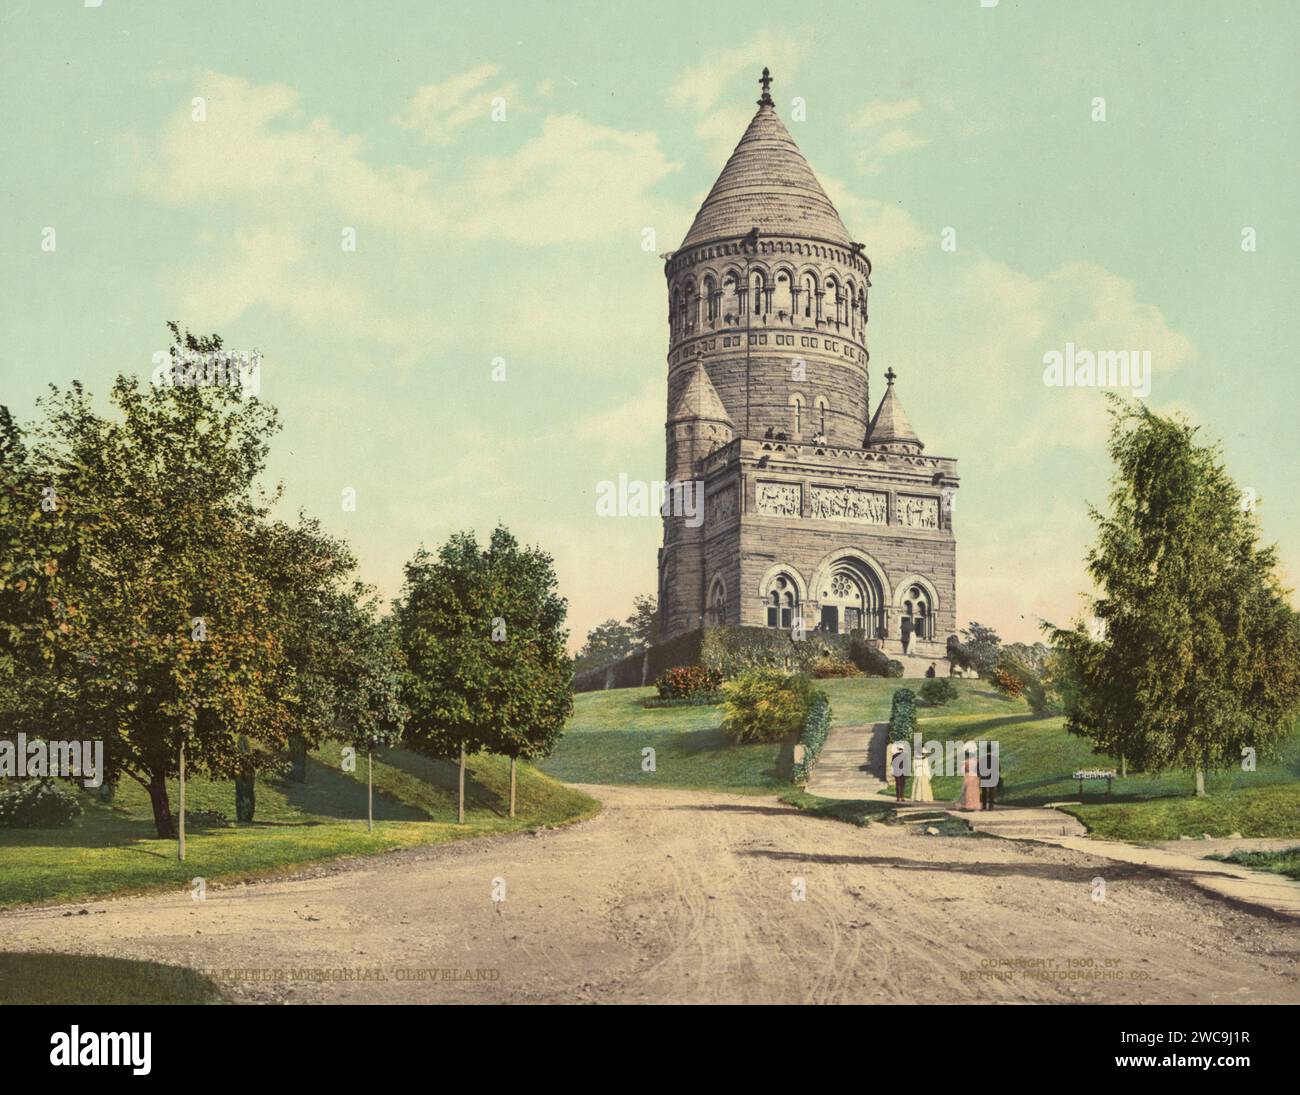 James A. Garfield Memorial, Lake View Cemetery, Cleveland, Cuyahoga County, Ohio 1900. Stockfoto